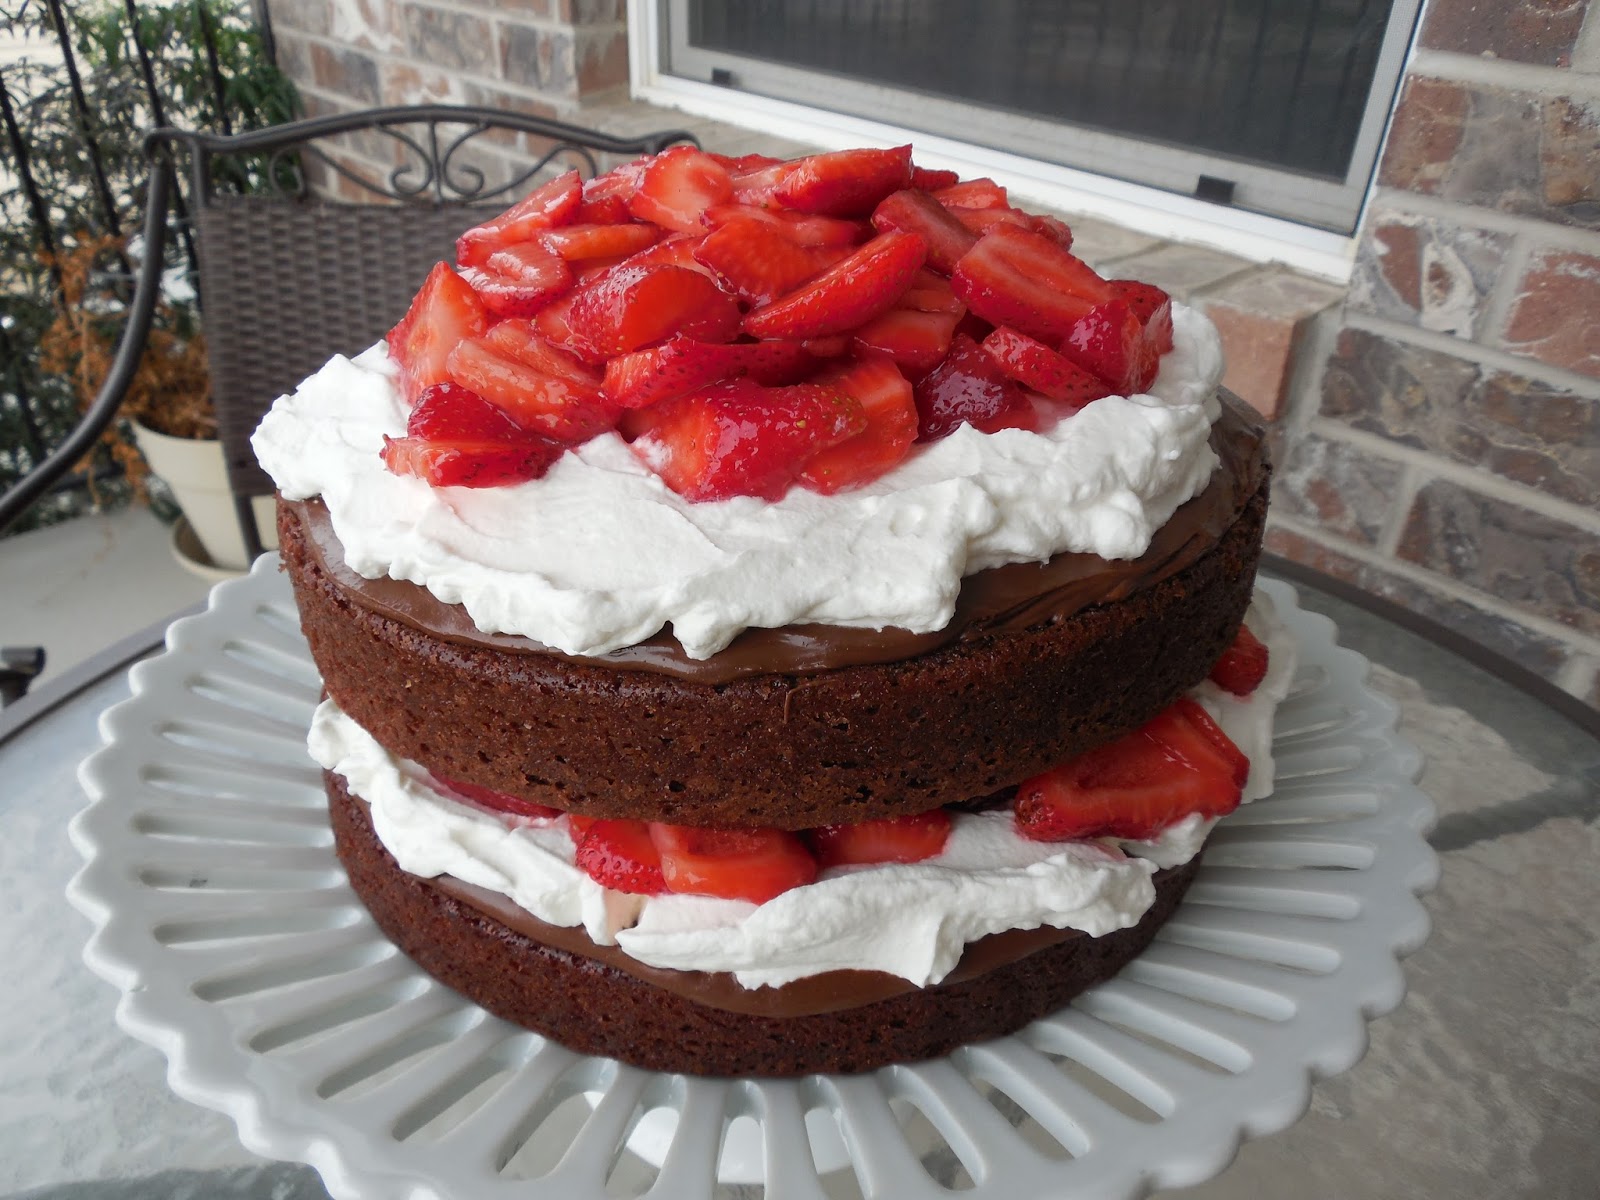 chocolate cake recipe with strawberries recipe from the pioneer woman this cake is off the chain the recipe is 